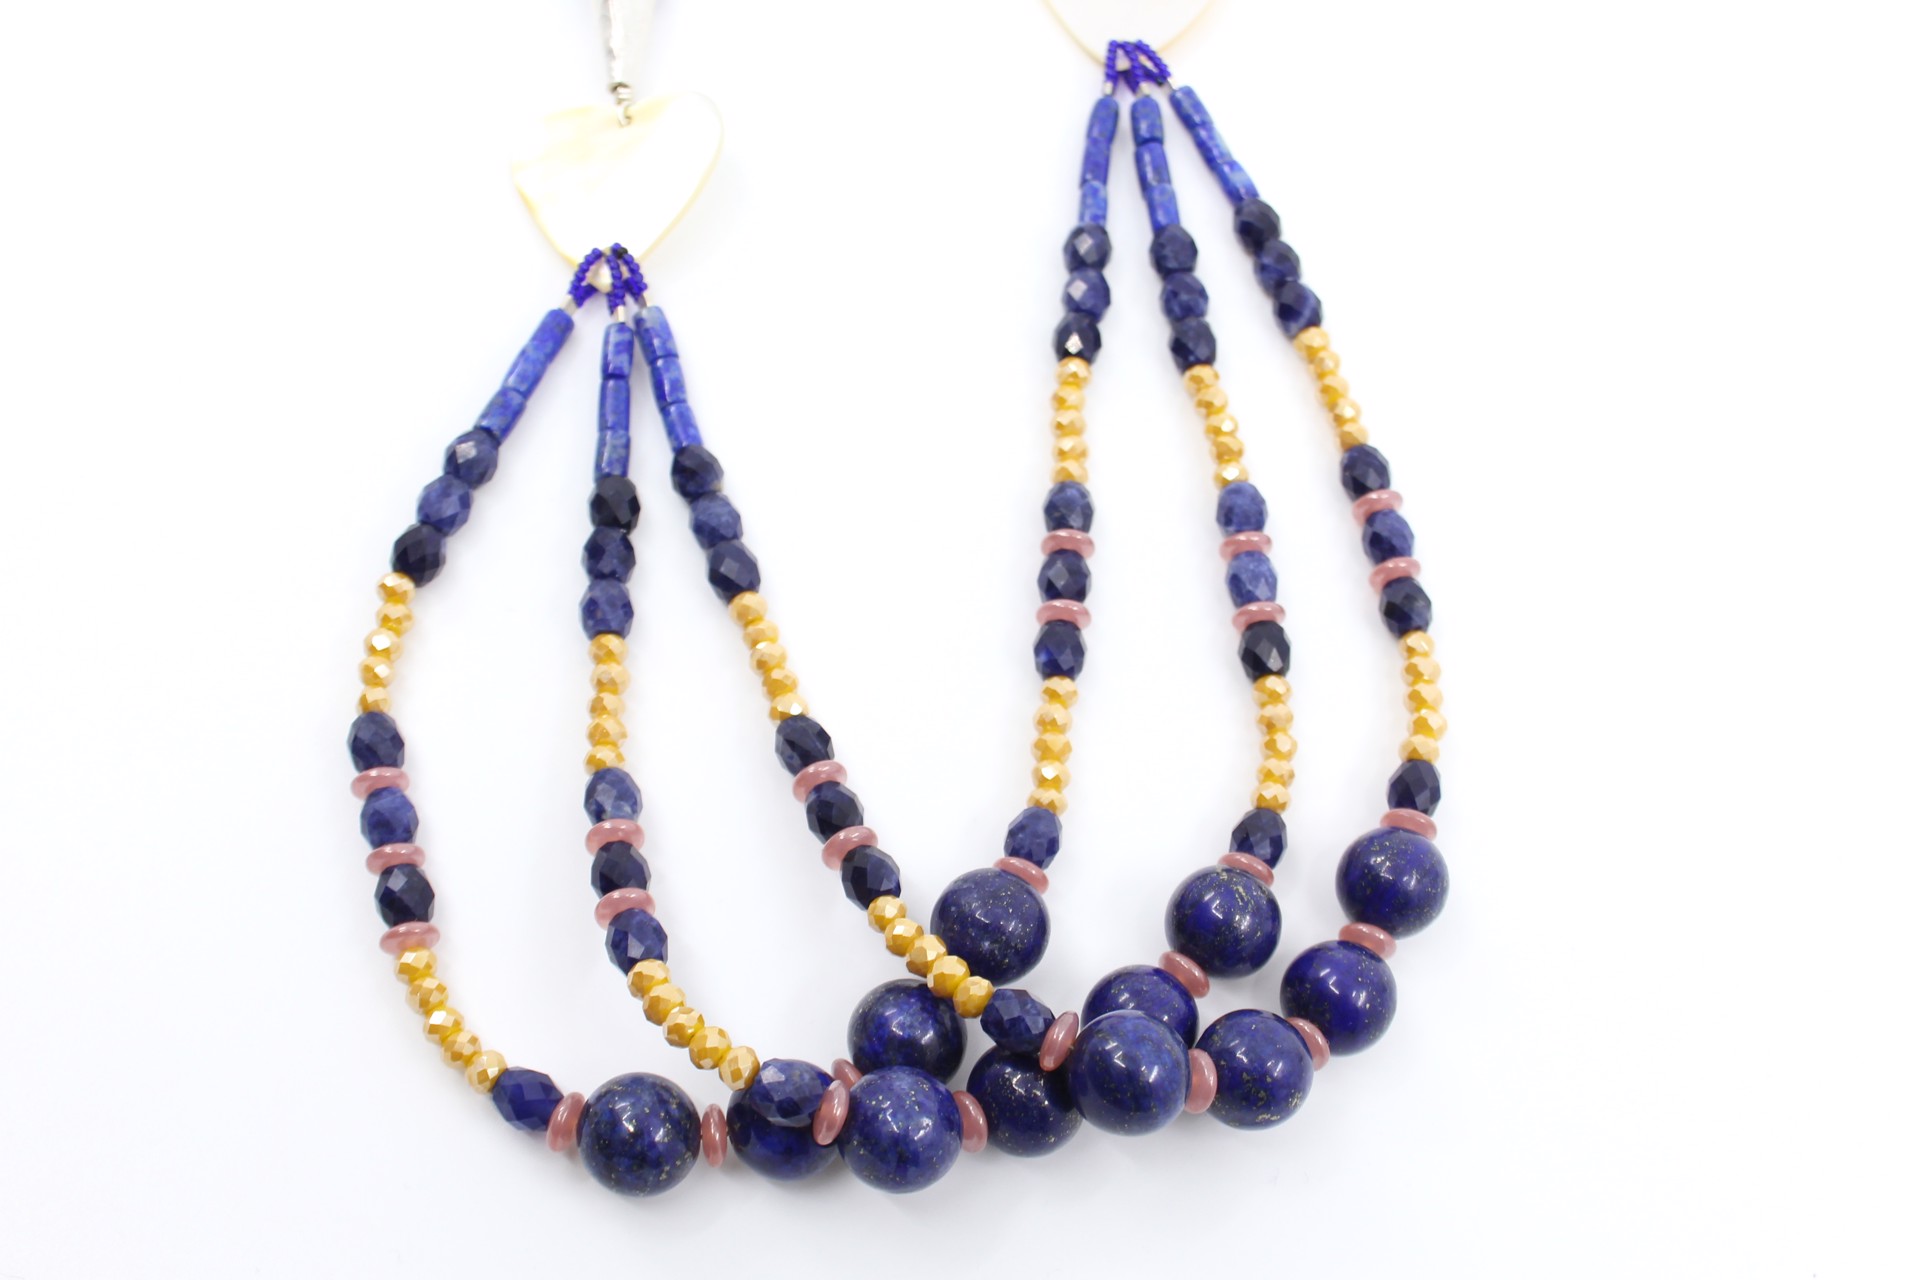 Lapis Necklace by Hollis Chitto